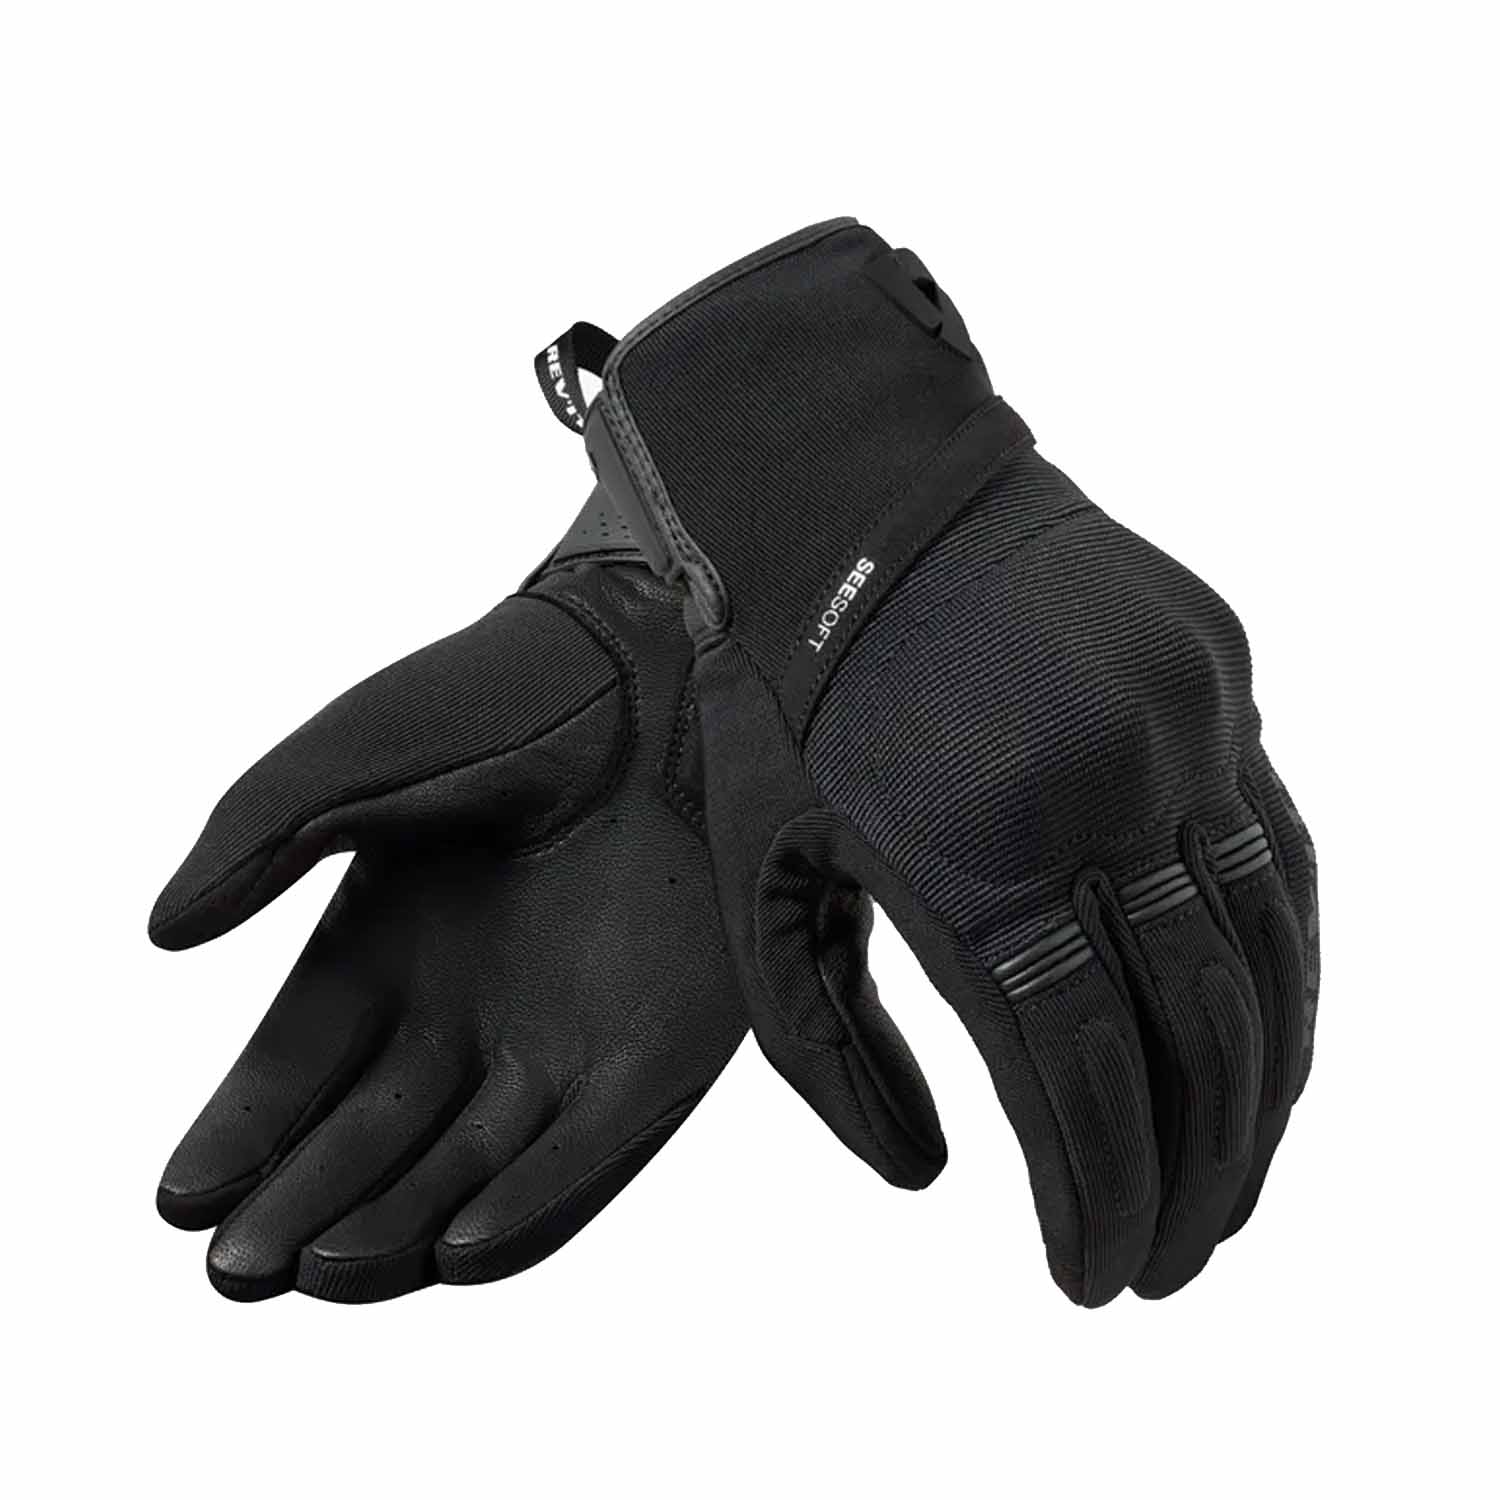 Image of EU REV'IT! Mosca 2 Gloves Black Taille 2XL